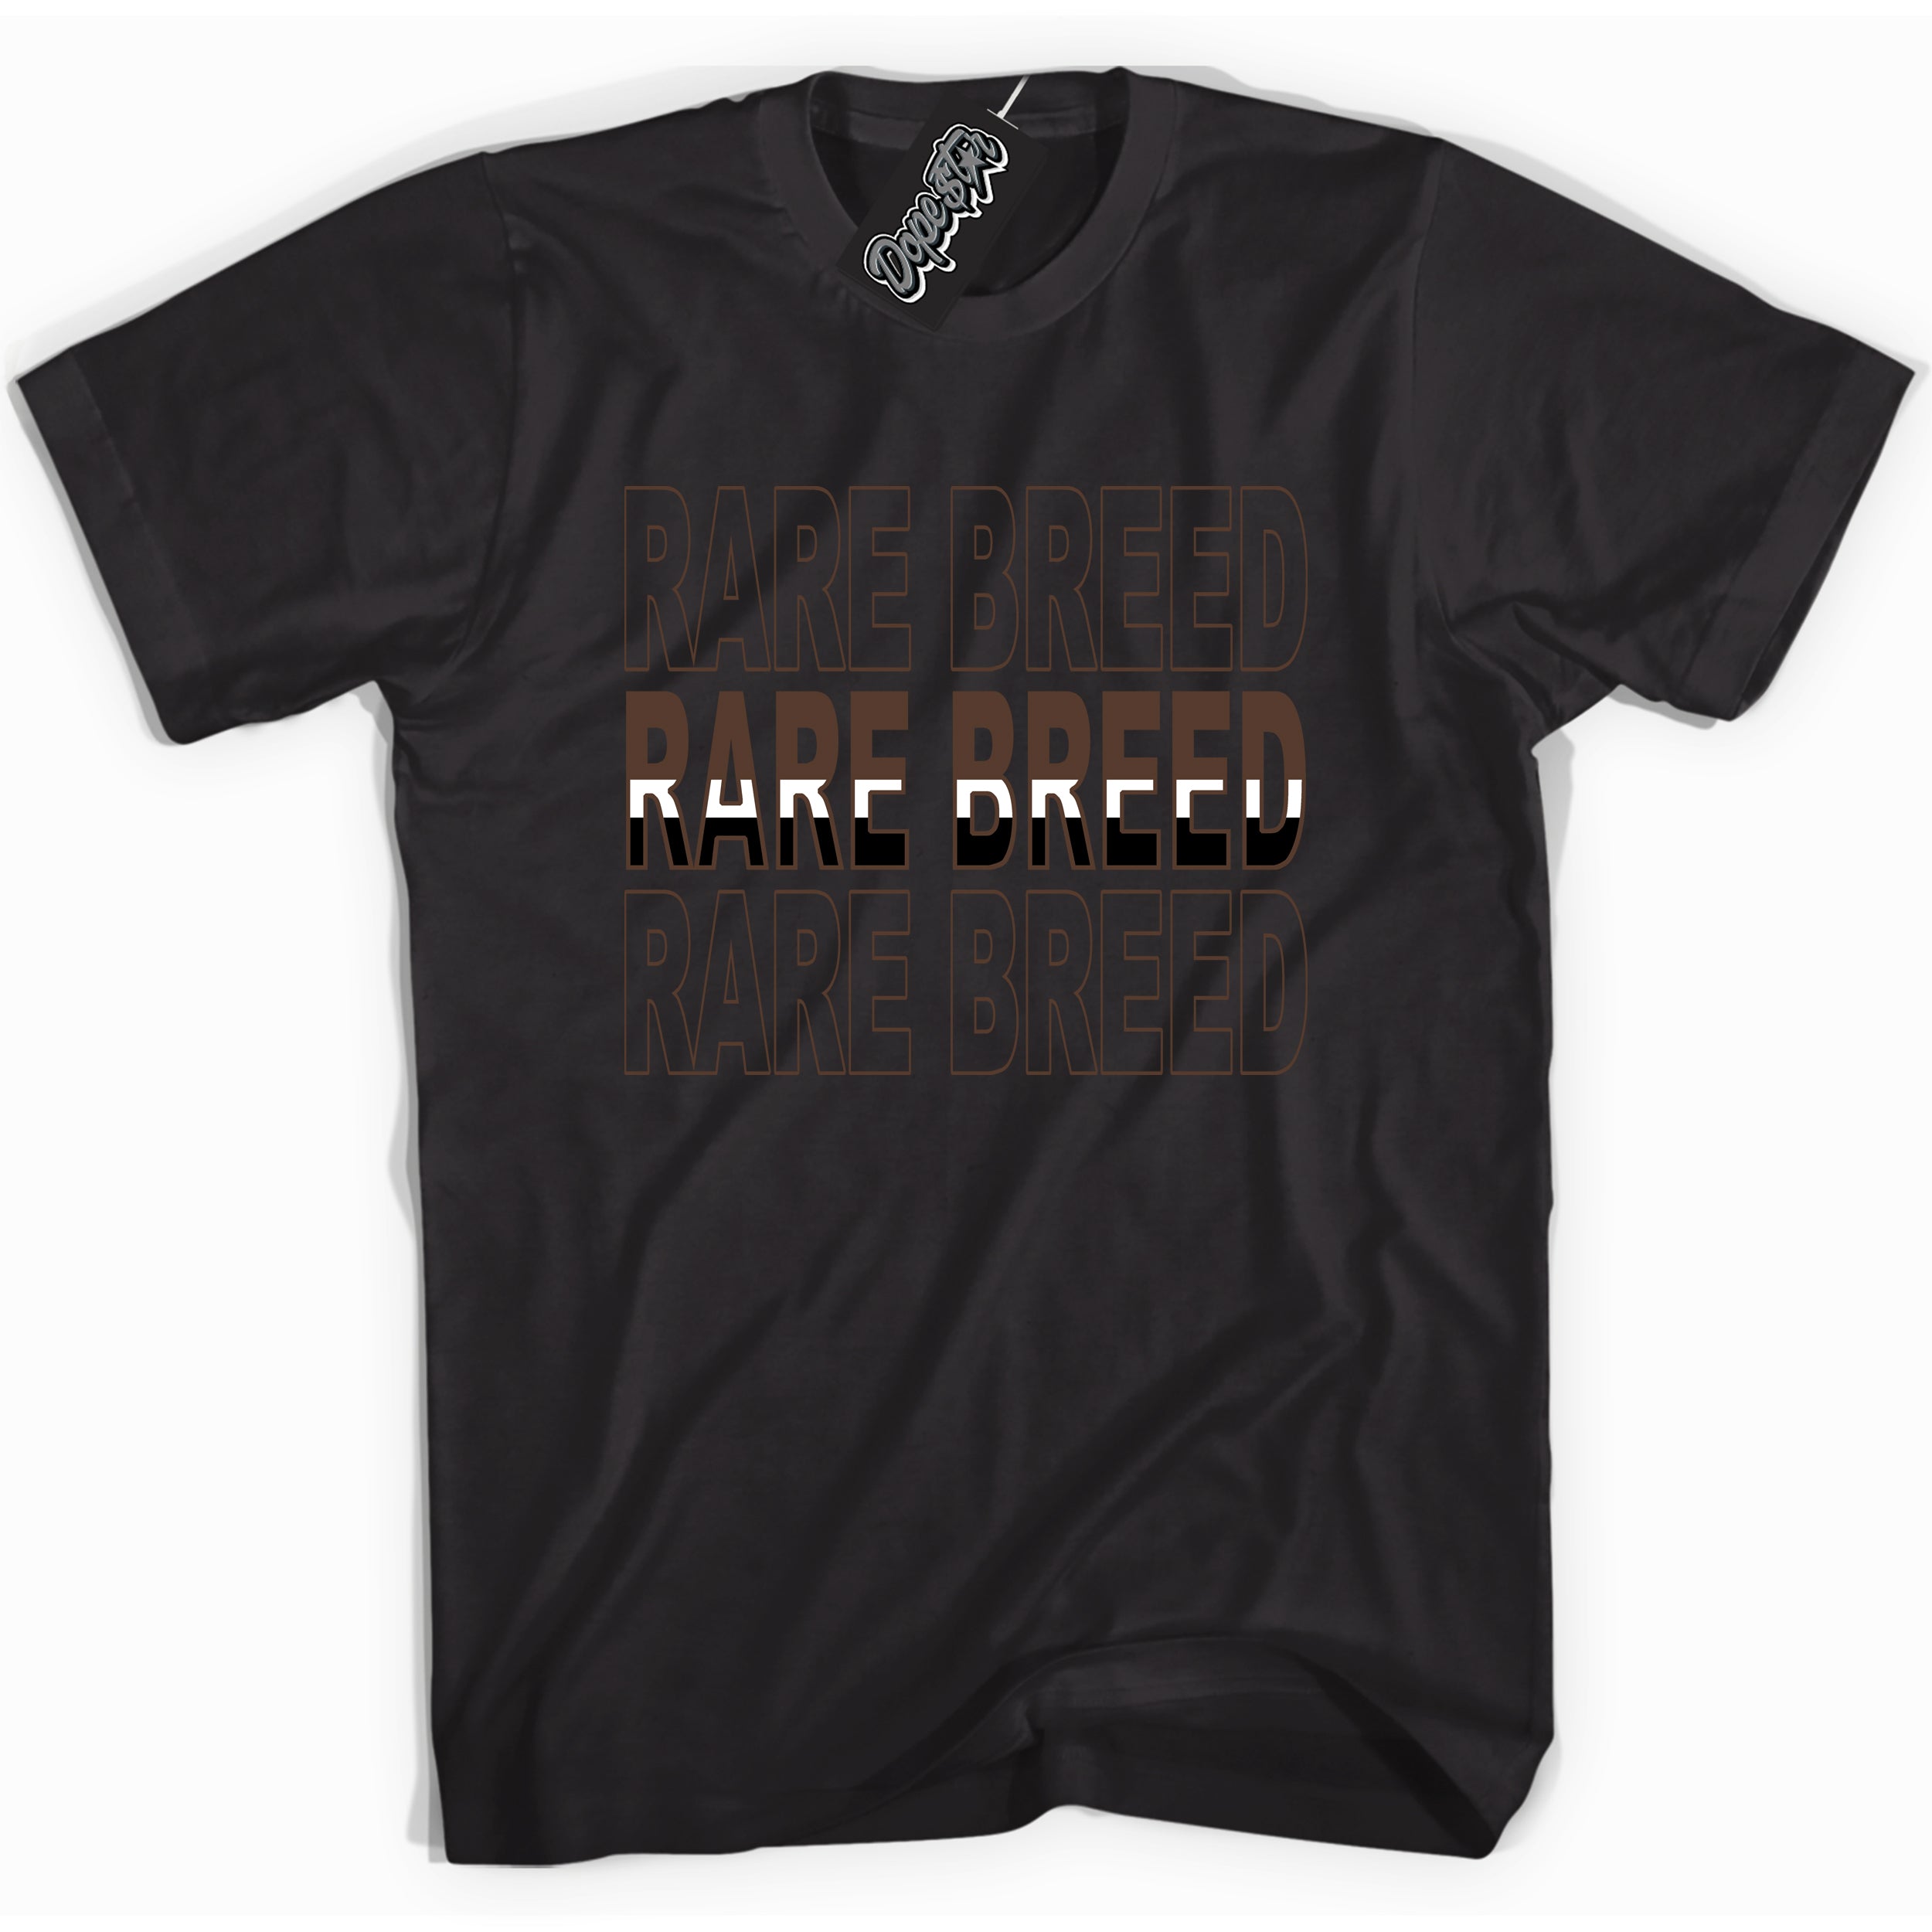 Cool Black graphic tee with “ Rare Breed ” design, that perfectly matches Palomino 1s sneakers 